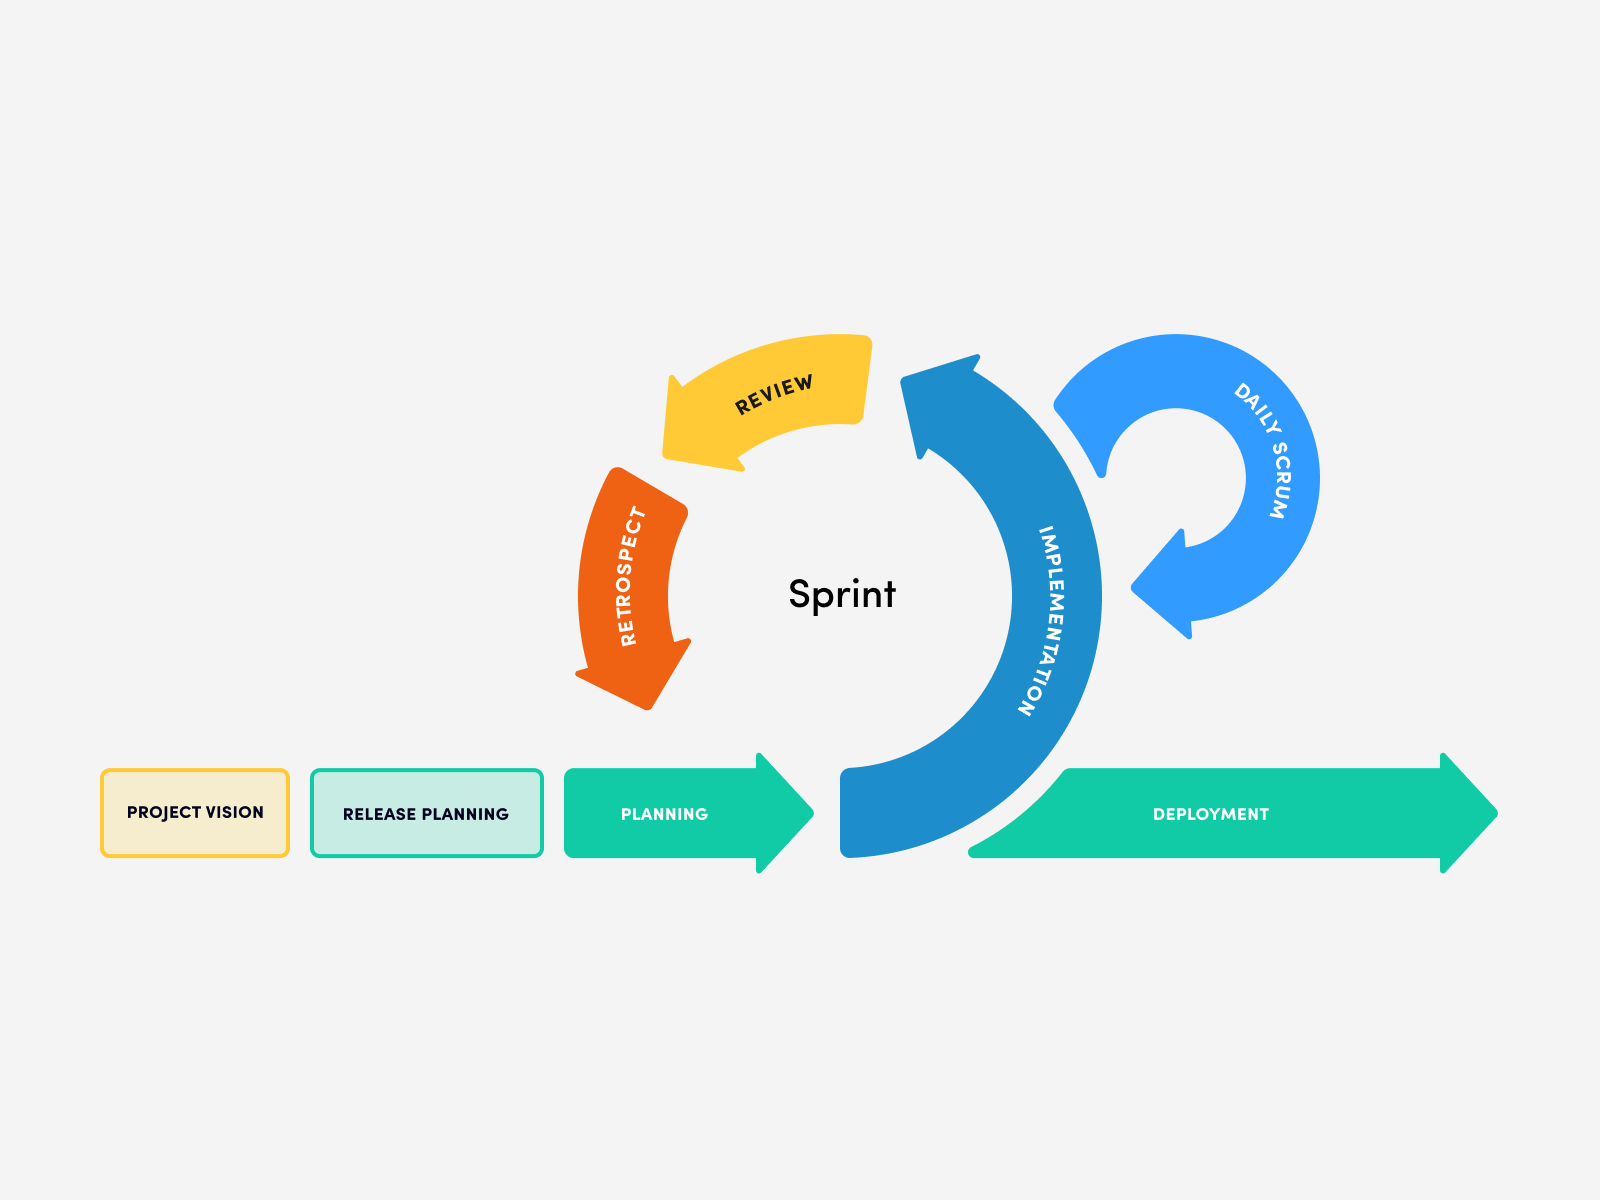 Work in sprints facilitates product development and improves overall efficiency